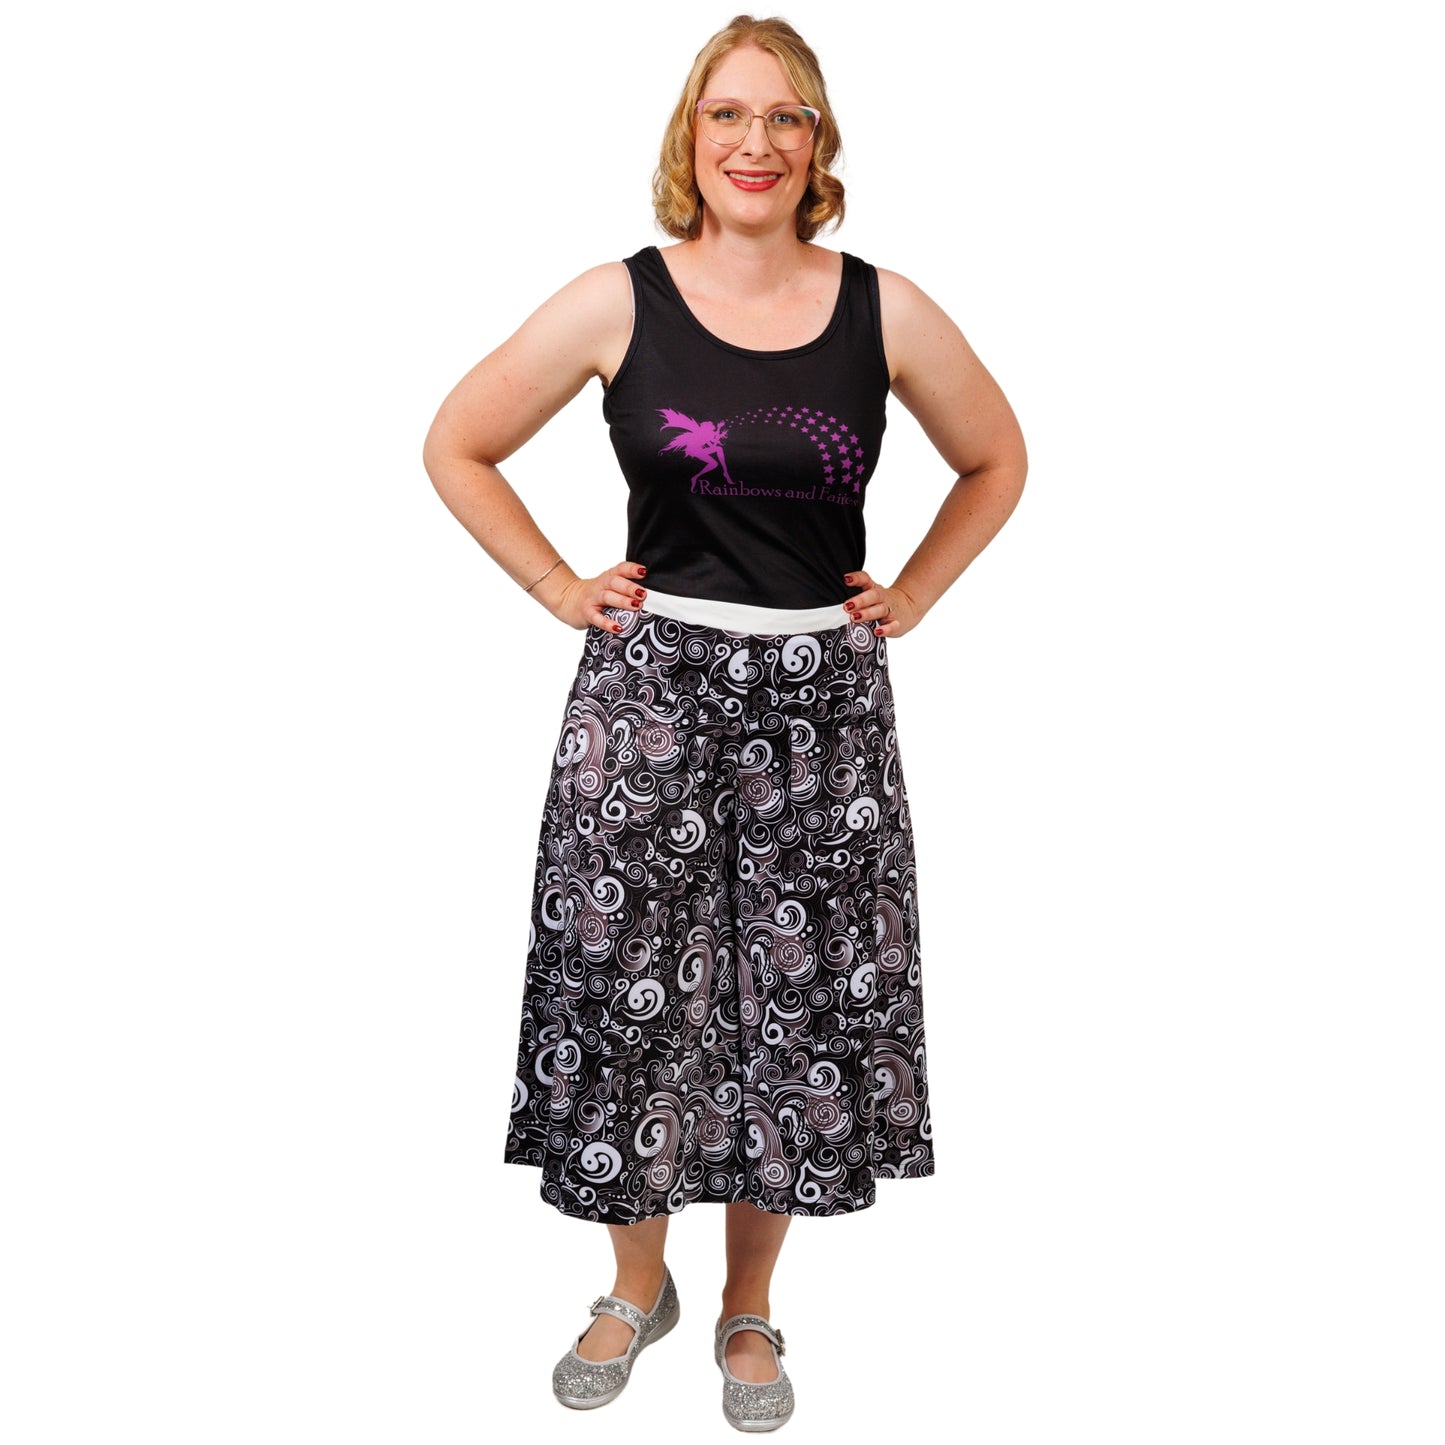 Abstract Culottes by RainbowsAndFairies.com (Black & White - Psychedelic - 3 Quarter Wide Leg Pants - Cute - Vintage Inspired) - SKU: CL_CULTS_ABSTR_ORG - Pic 02